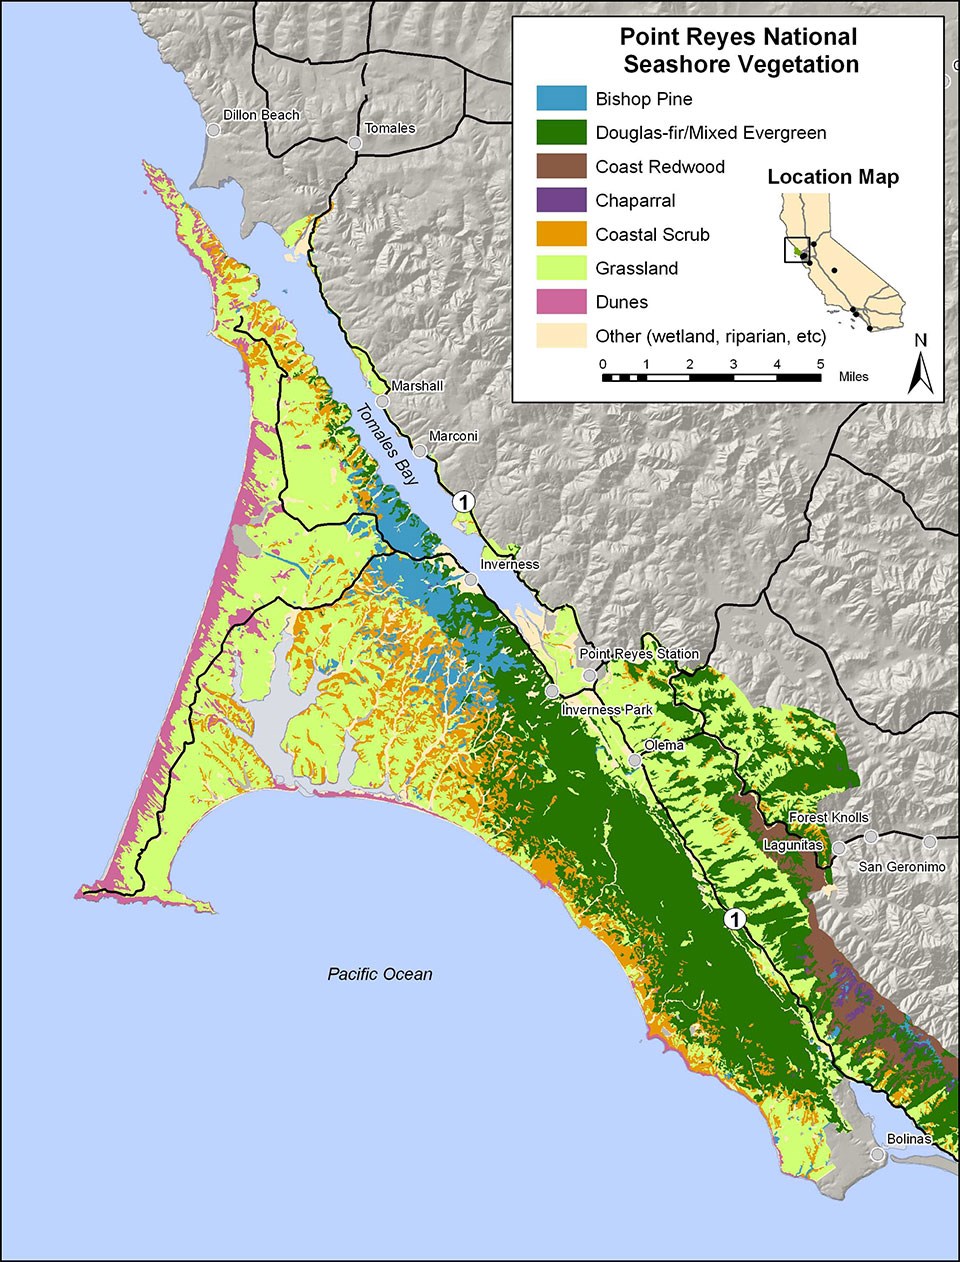 A map shows the distribution of dominant types of vegetation found throughout Point Reyes National Seashore and the Bolinas Ridge section of Golden Gate National Recreation Area.